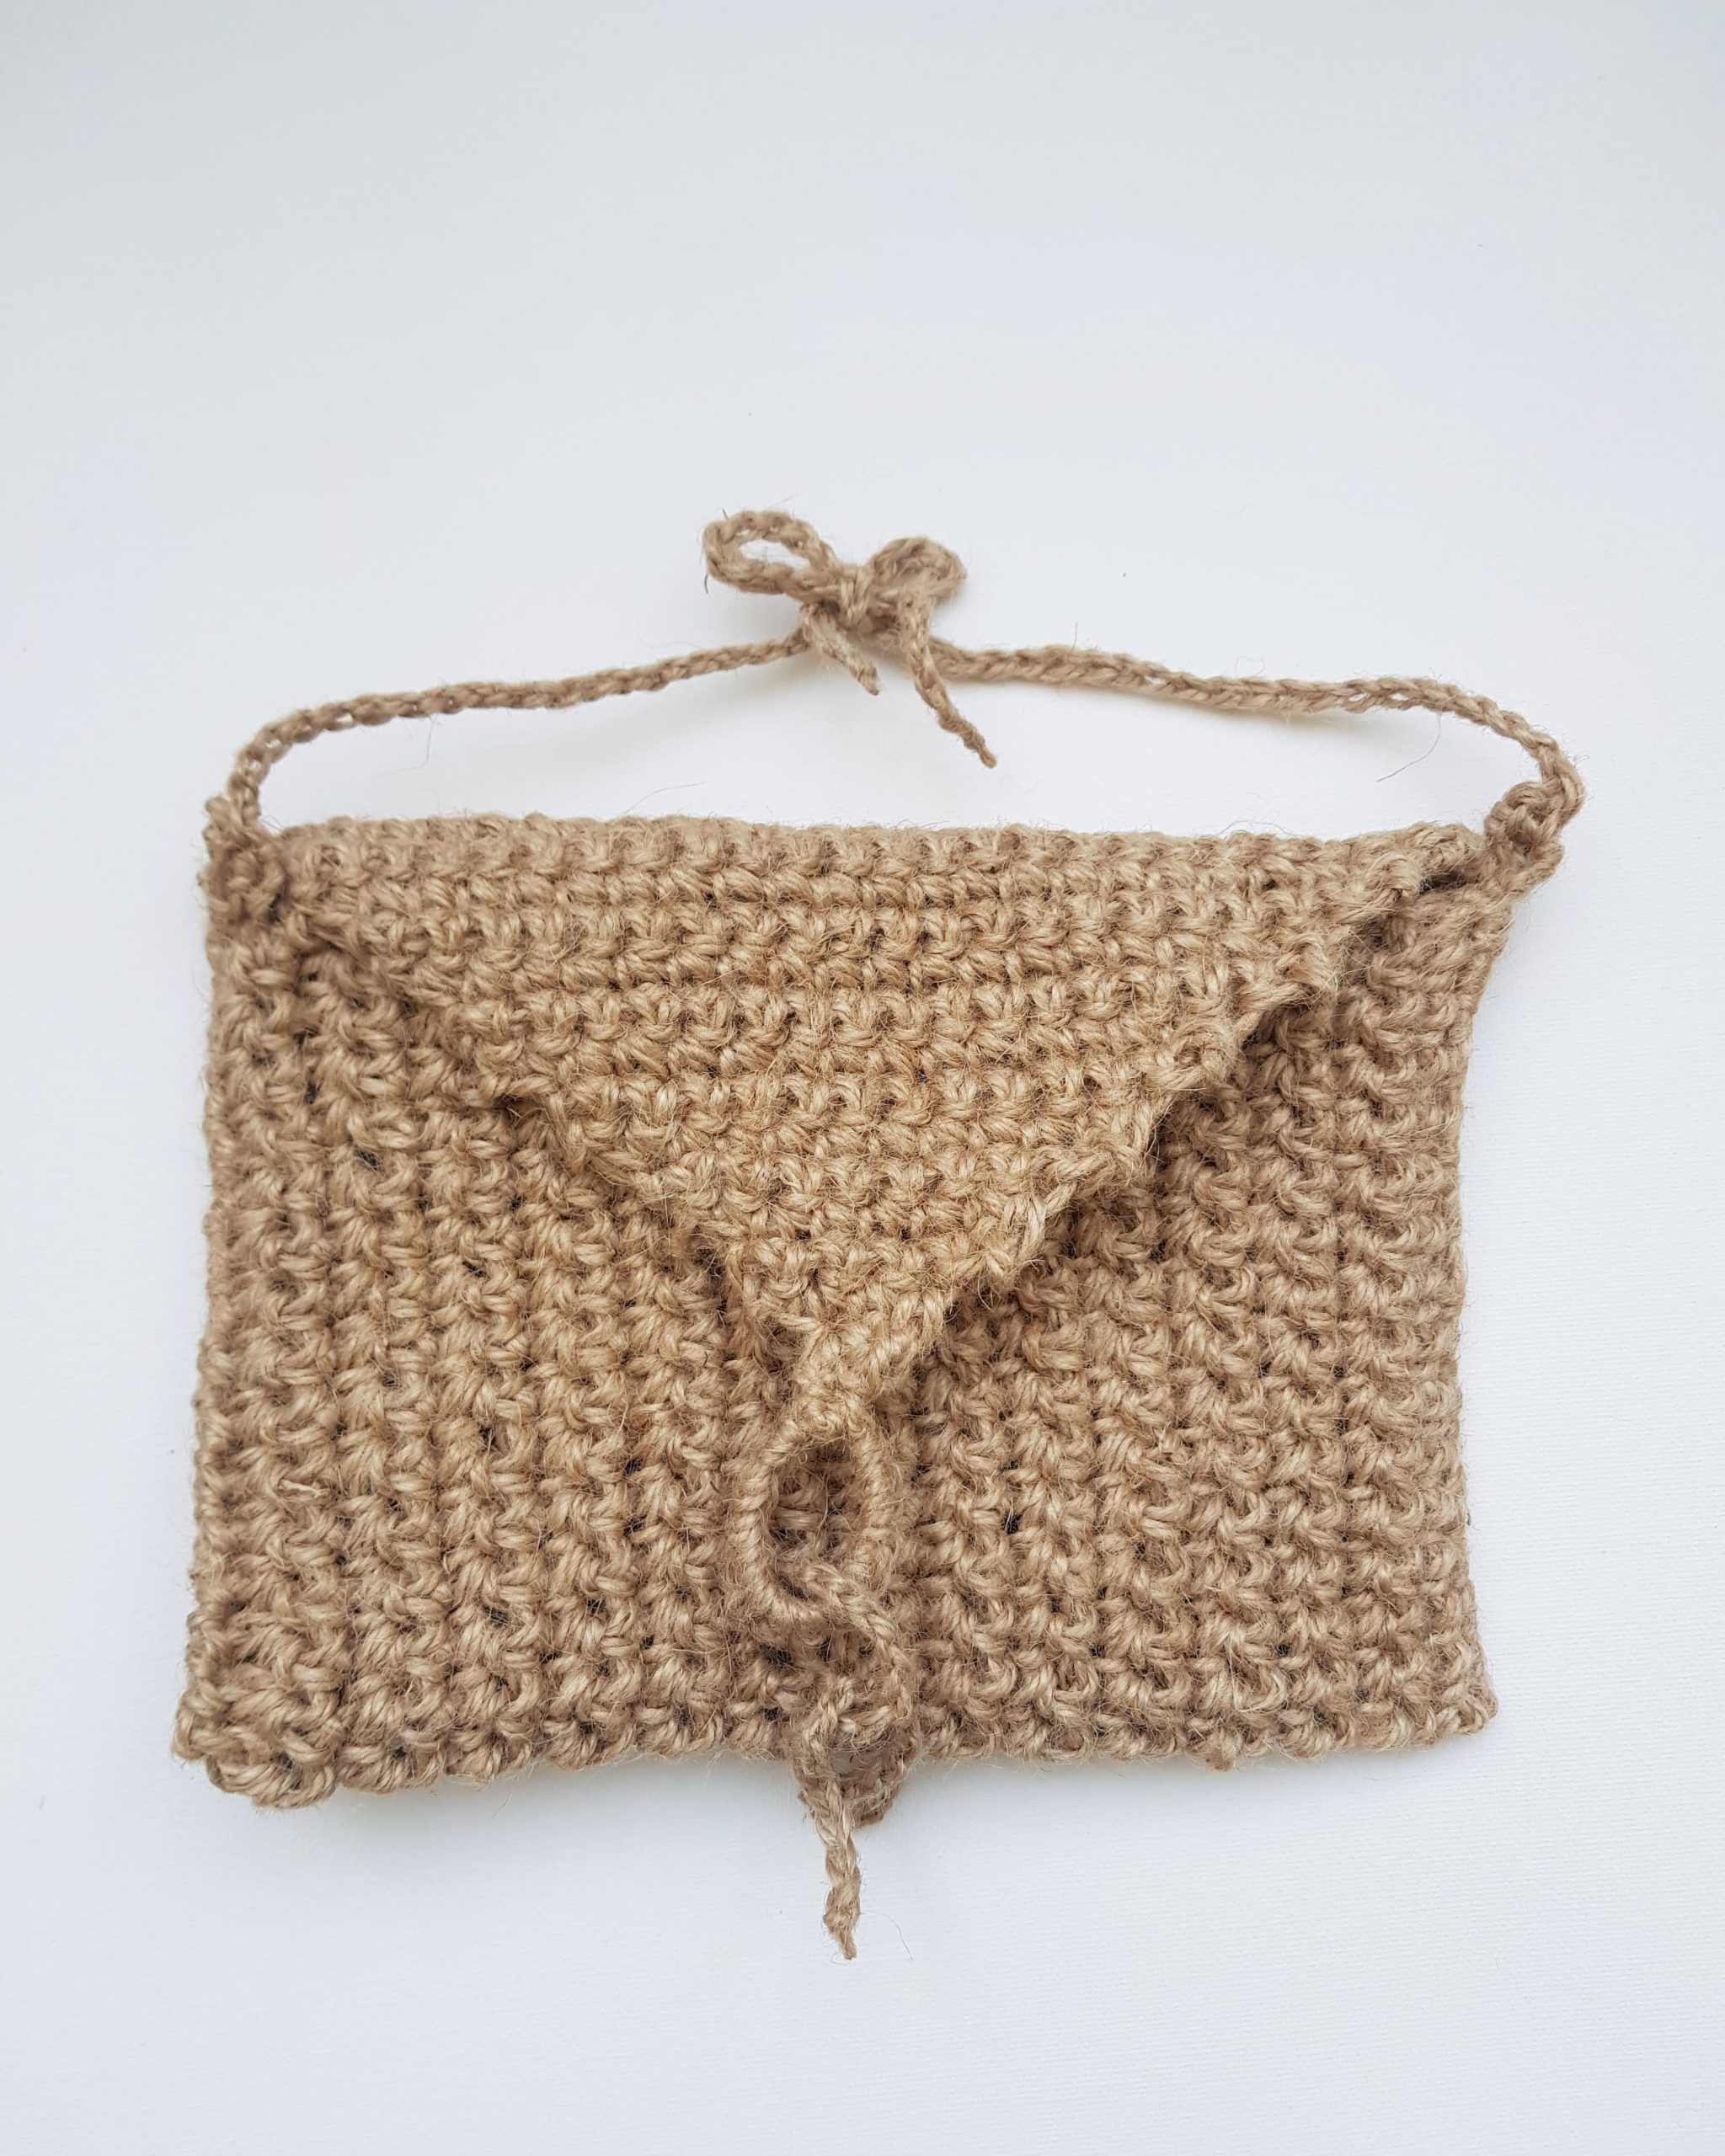 Minimalist Shoulder Bags – Ideas and Free Crochet Patterns - Your Crochet